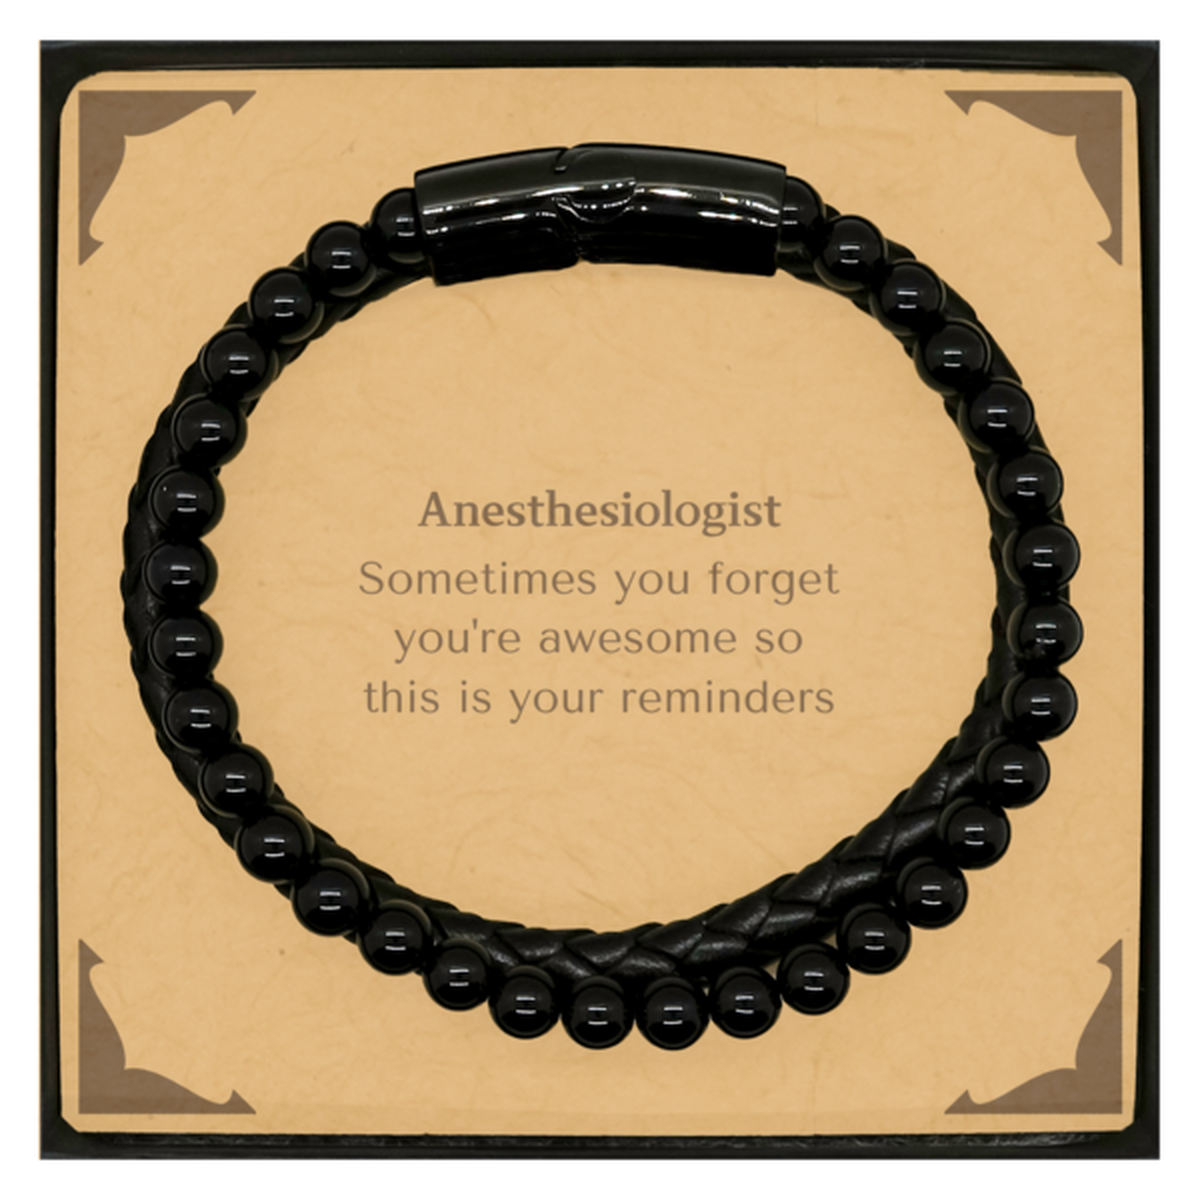 Sentimental Anesthesiologist Stone Leather Bracelets, Anesthesiologist Sometimes you forget you're awesome so this is your reminders, Graduation Christmas Birthday Gifts for Anesthesiologist, Men, Women, Coworkers